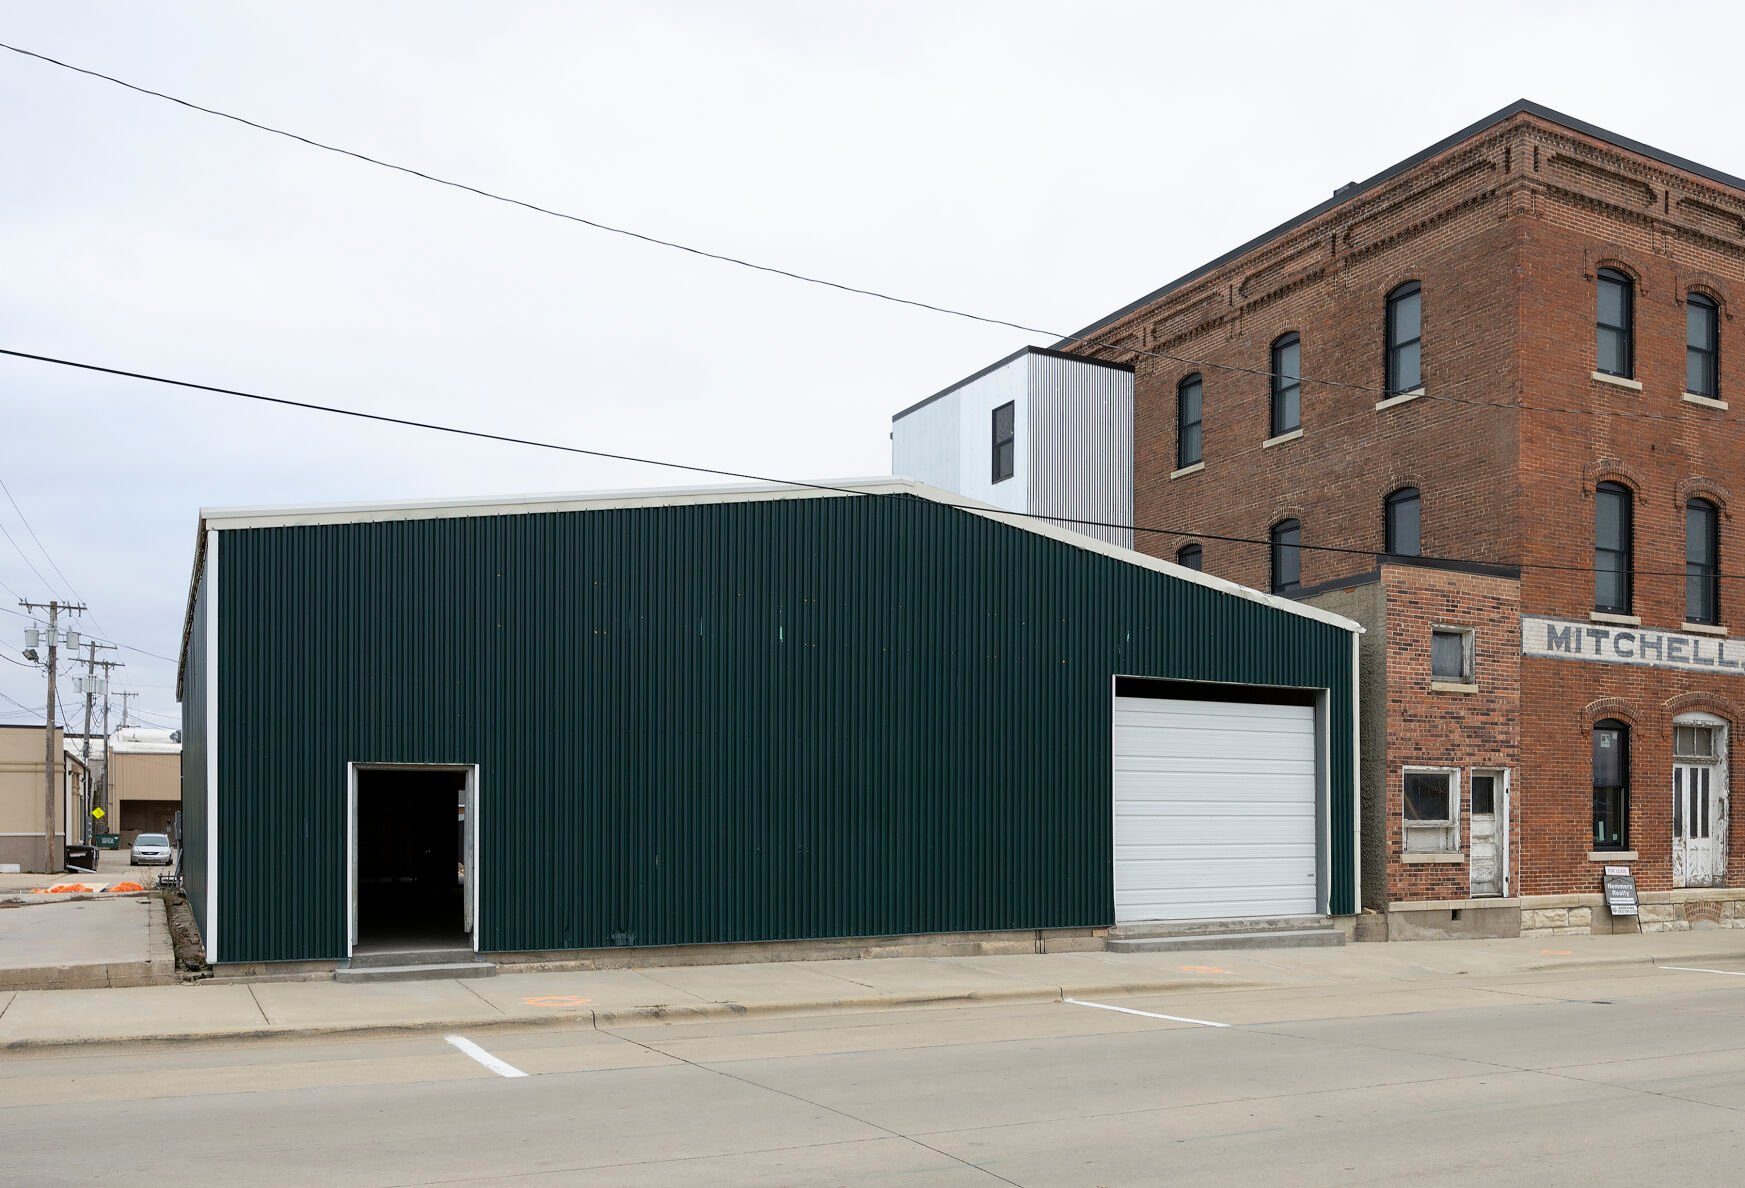 Exterior of the building that will soon be home to Timber City Fitness in Maquoketa, Iowa. Photo taken Friday, Nov. 12, 2022.    PHOTO CREDIT: Stephen Gassman